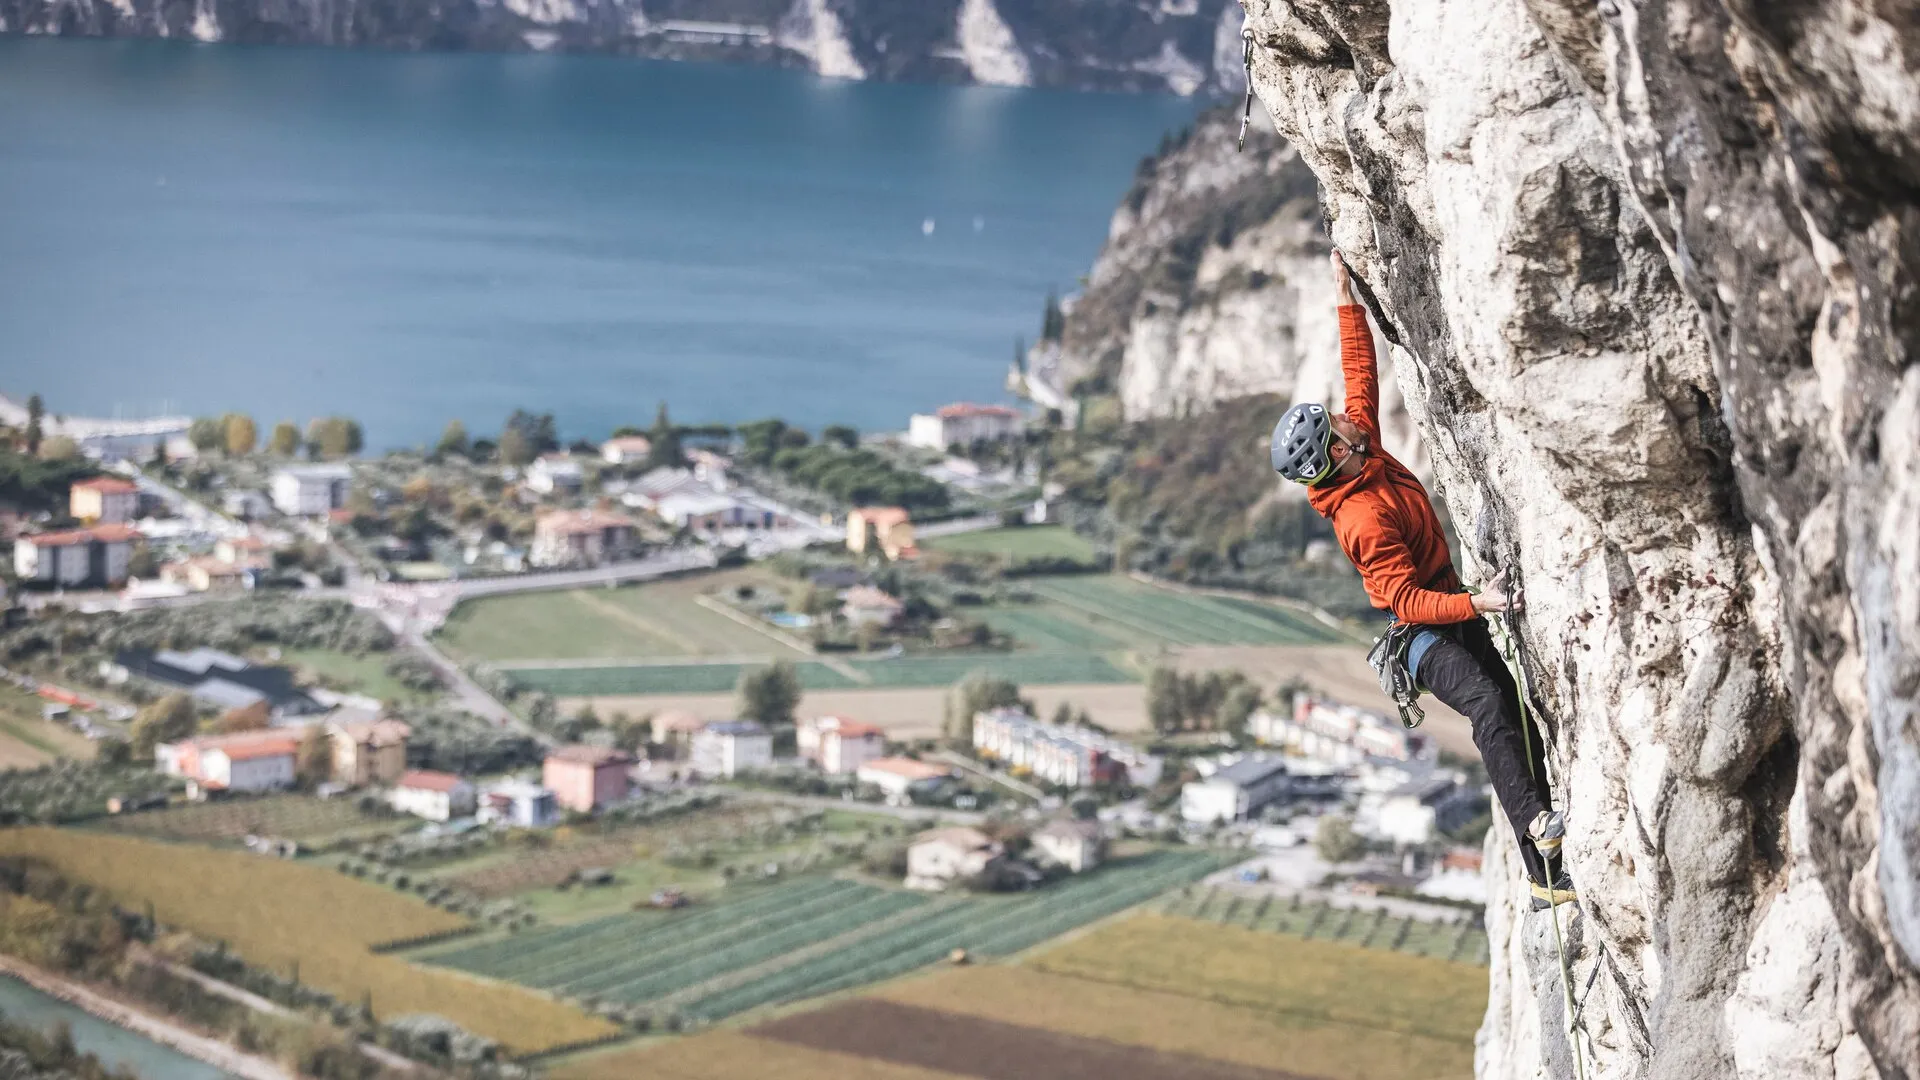 Klettern in Arco am Gardasee and den Dolomiten in Italy, Europe | Climbing - Rated 0.9